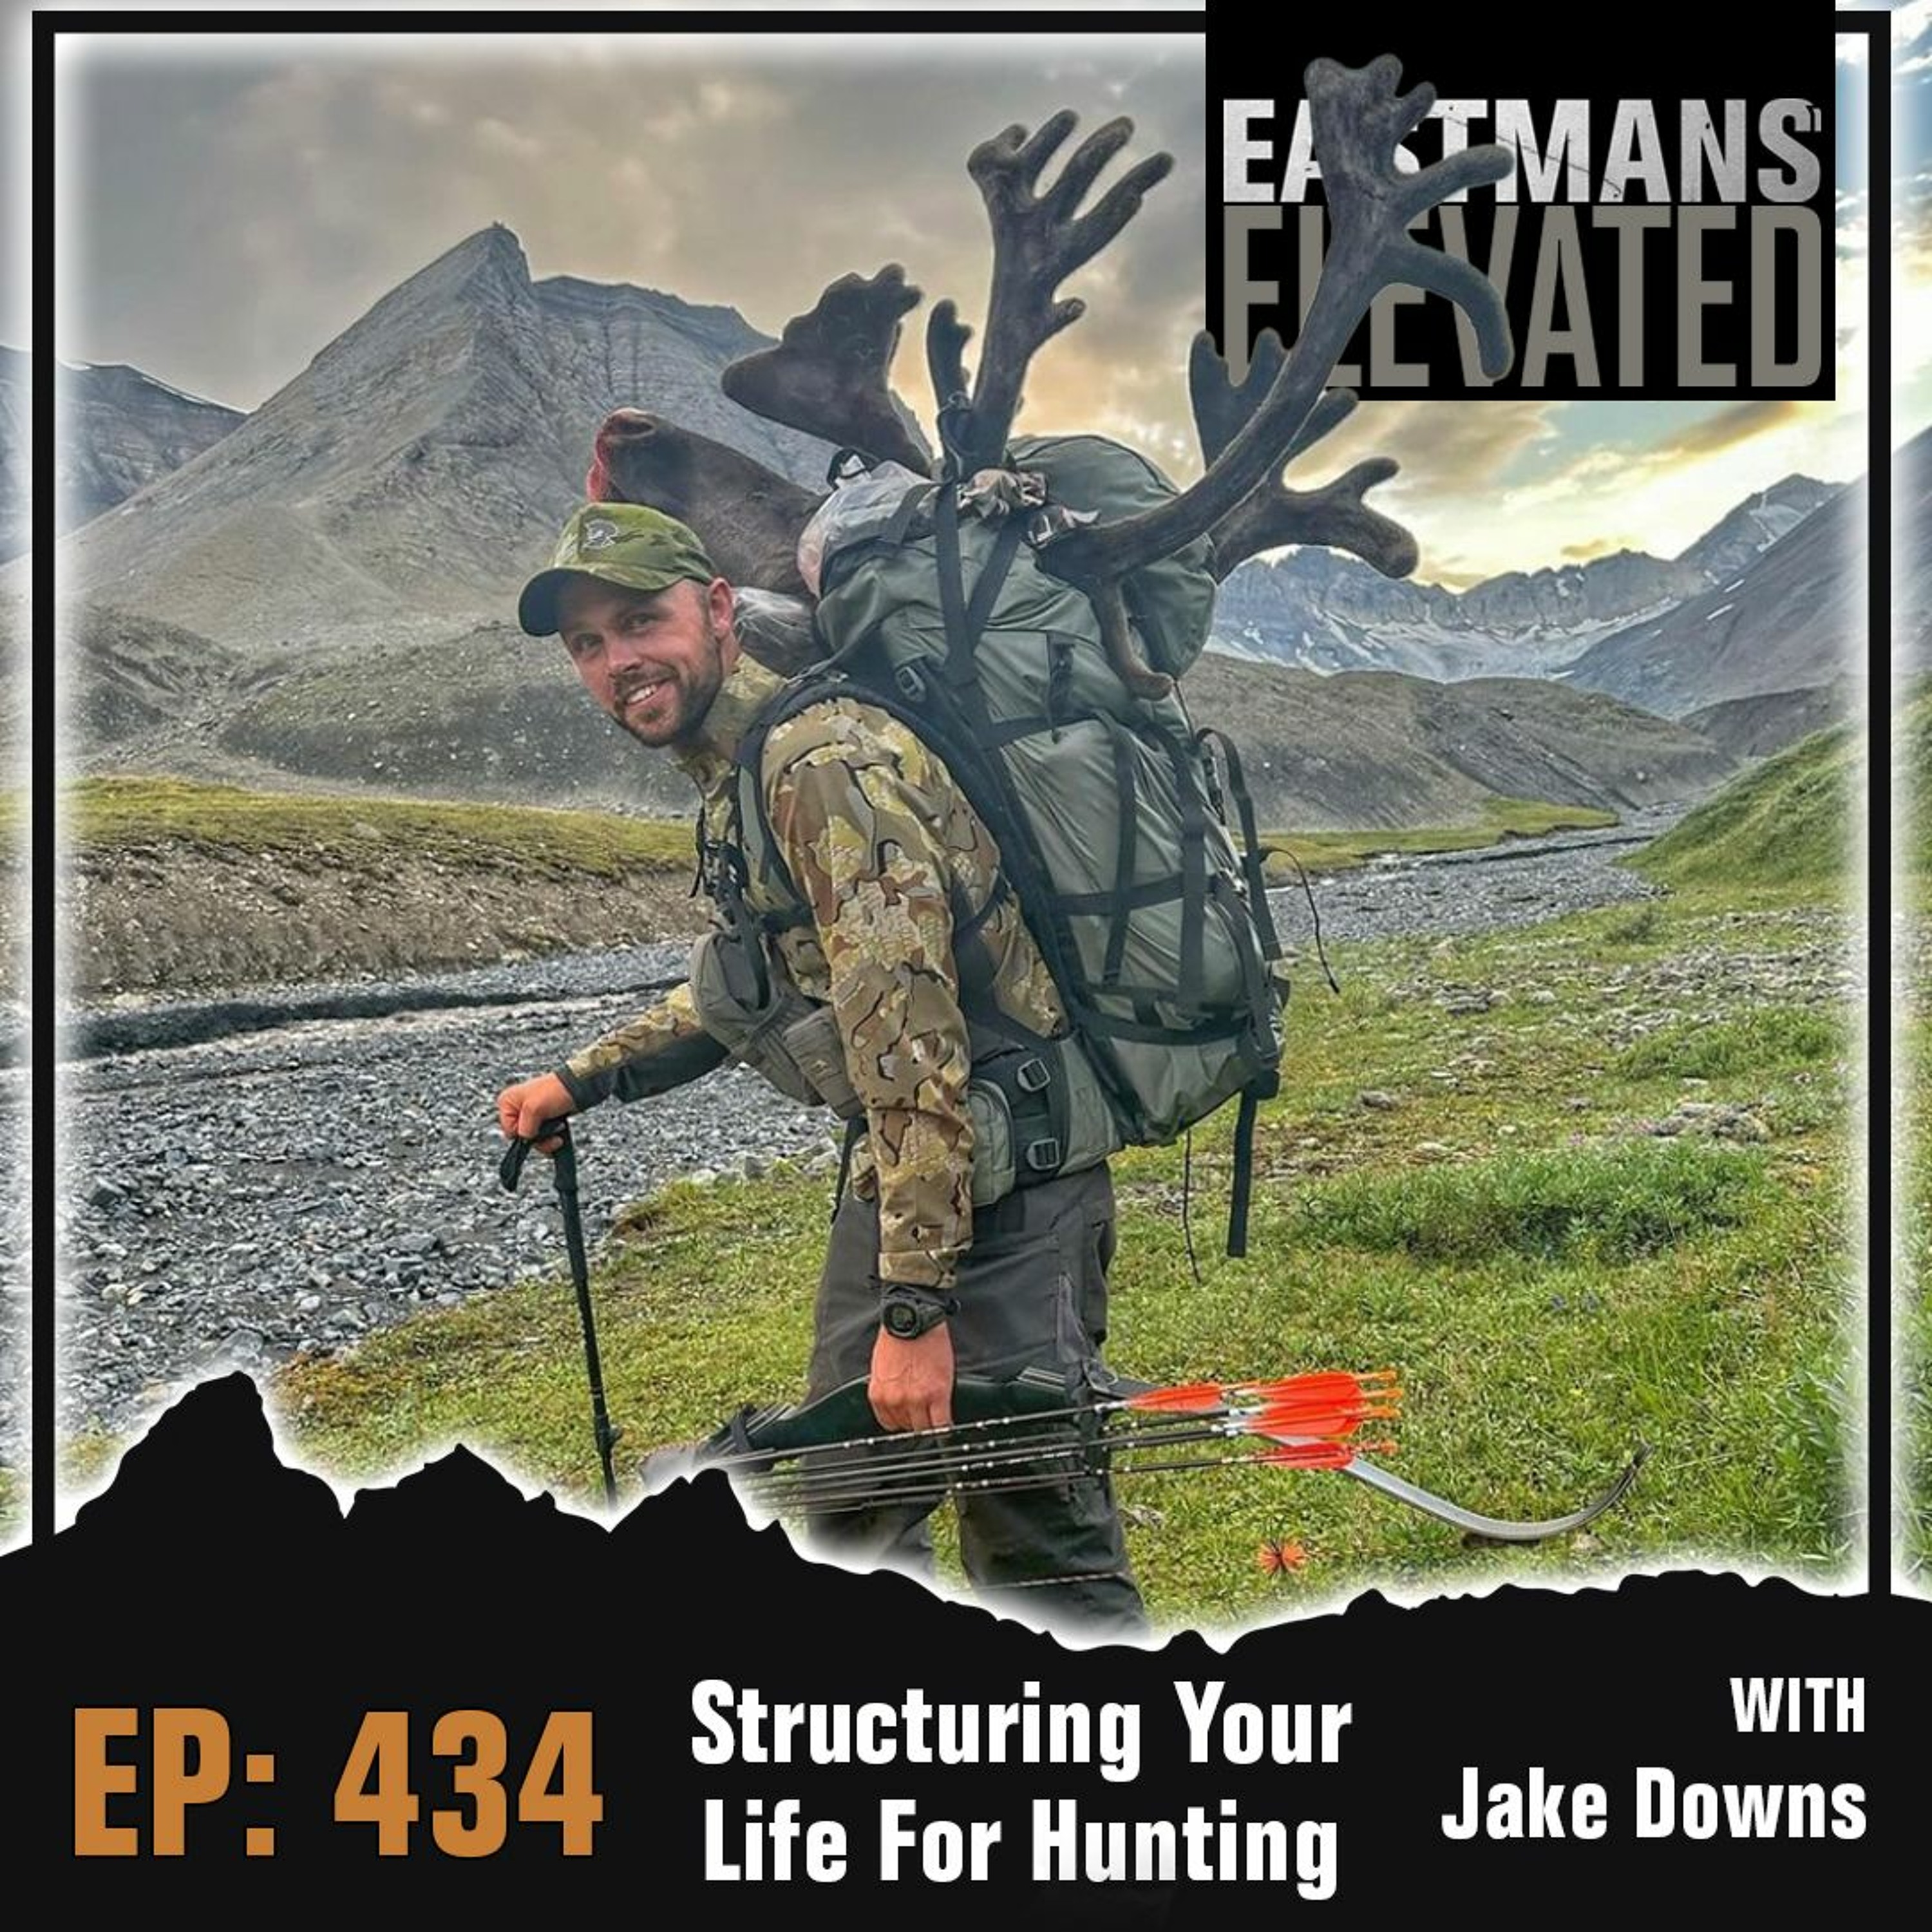 Episode 434: Structuring Your Life For Hunting With Jake Downs